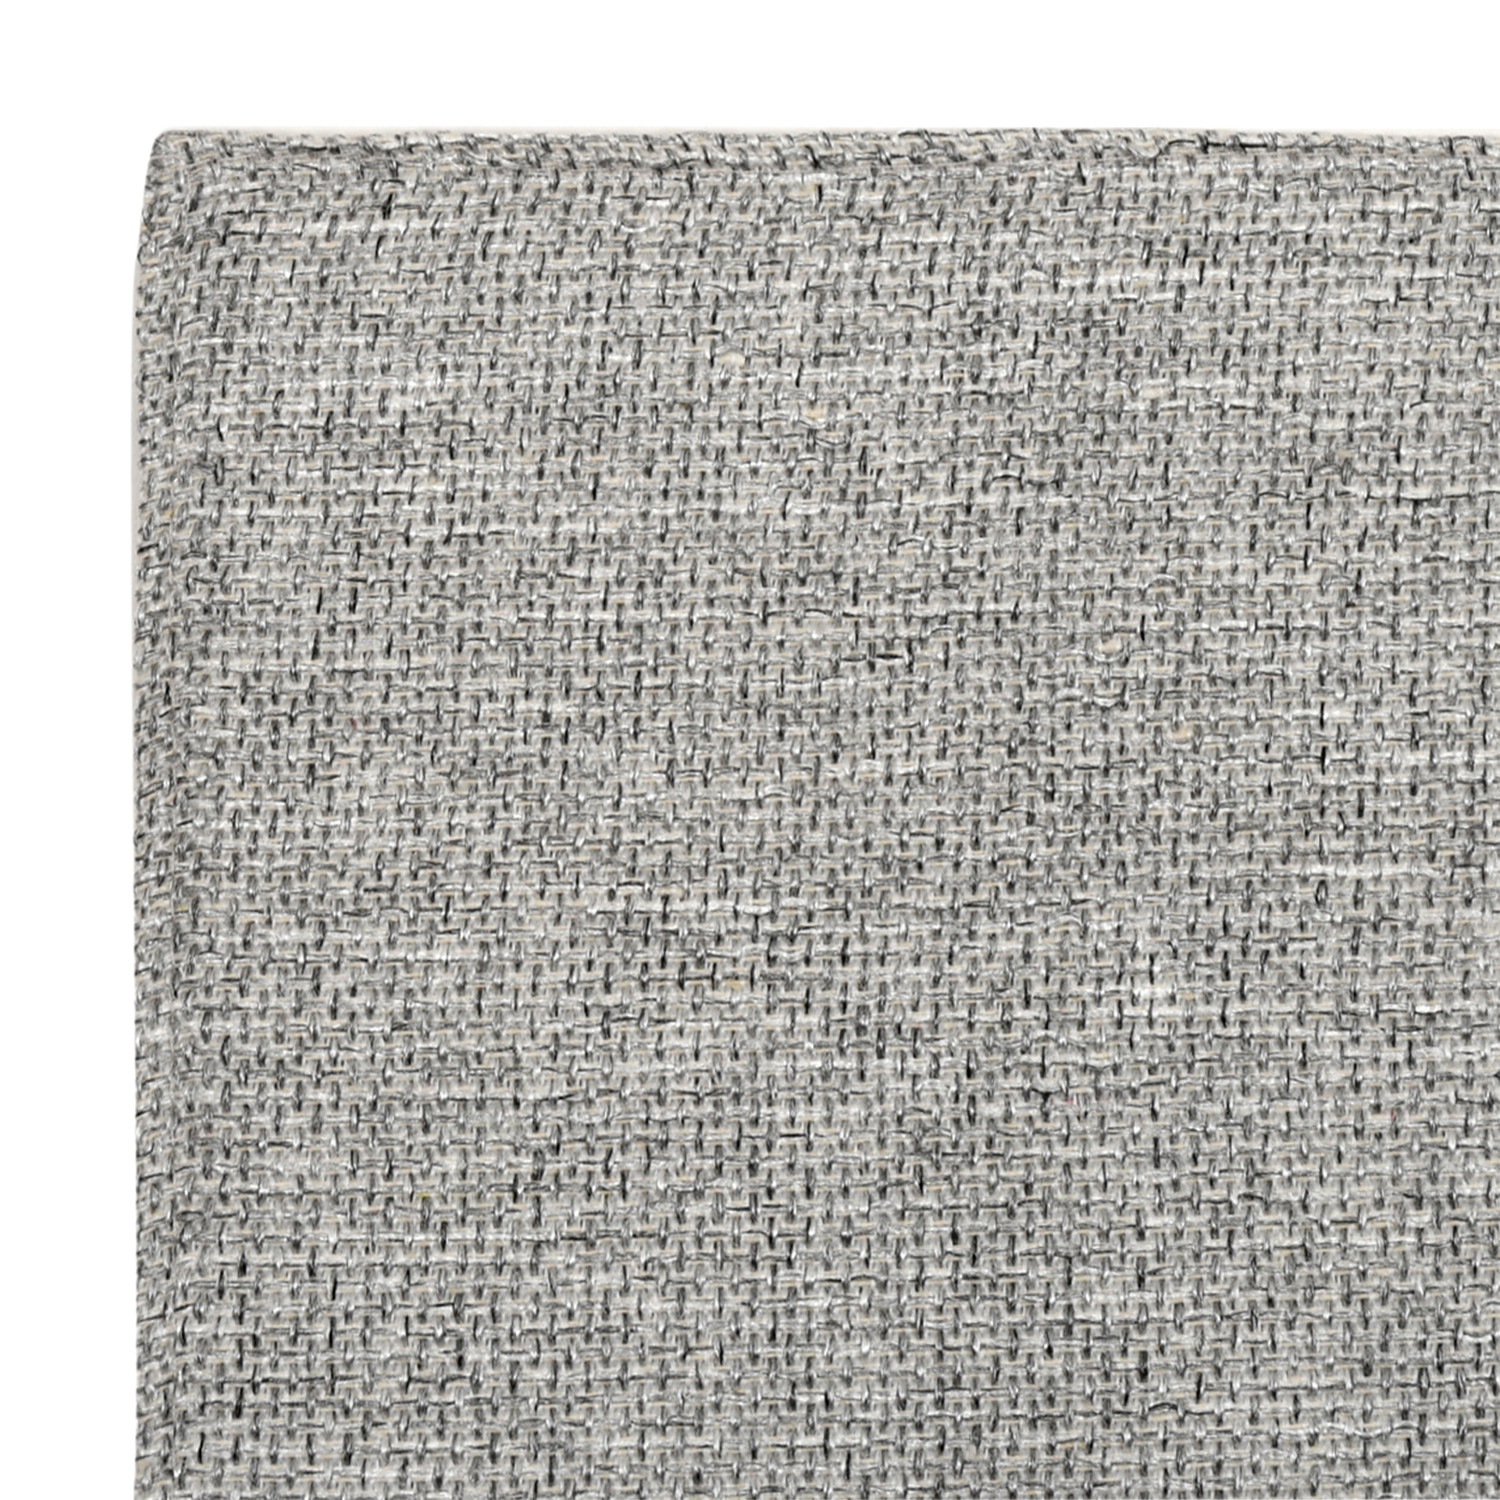 Kuber Industries Jute Table Placemat for Home, Hotels, Set of 6 (Grey)